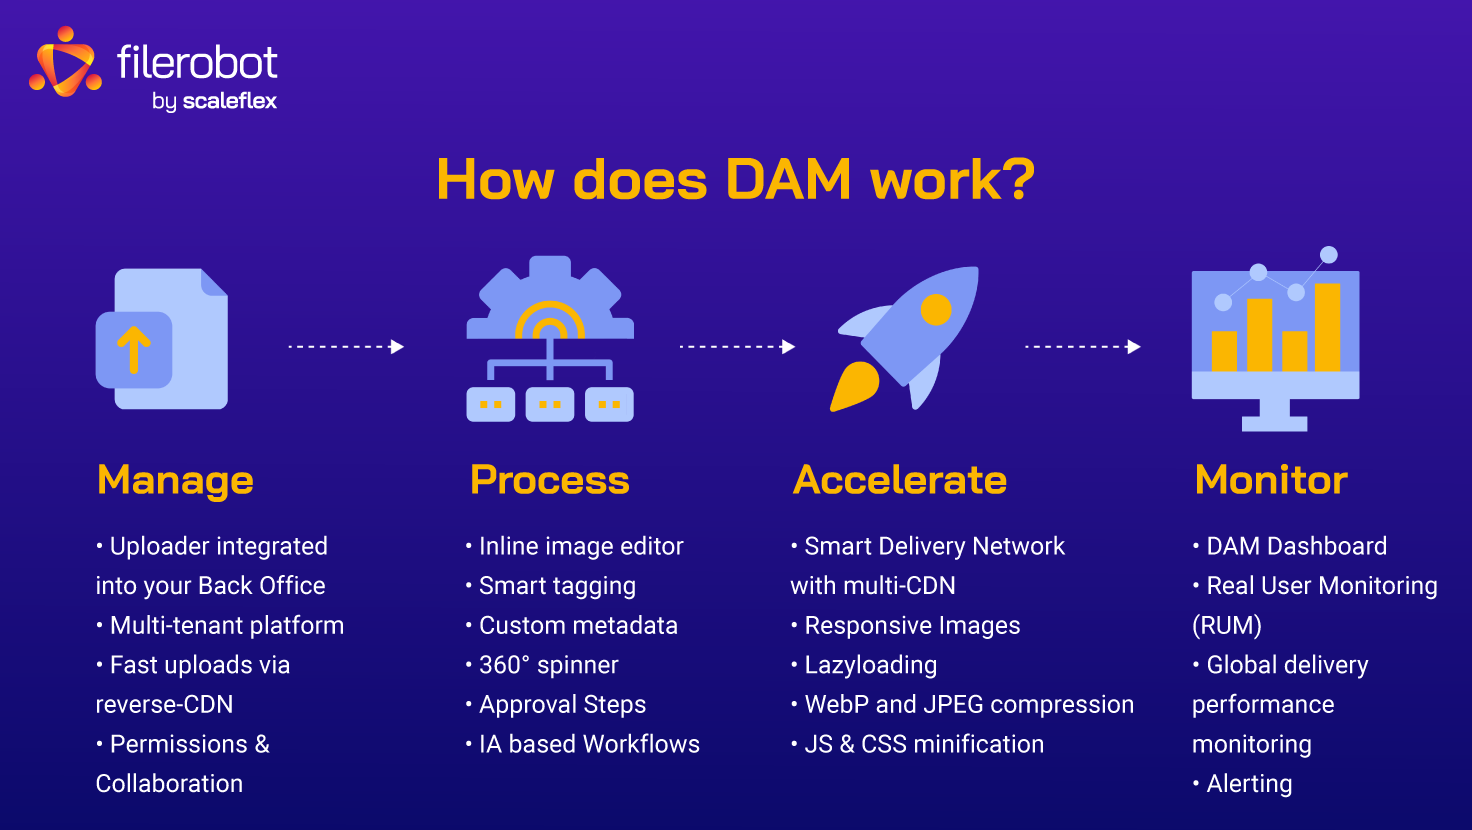 The key principal stages that a DAM performs to manage and distribute your digital assets